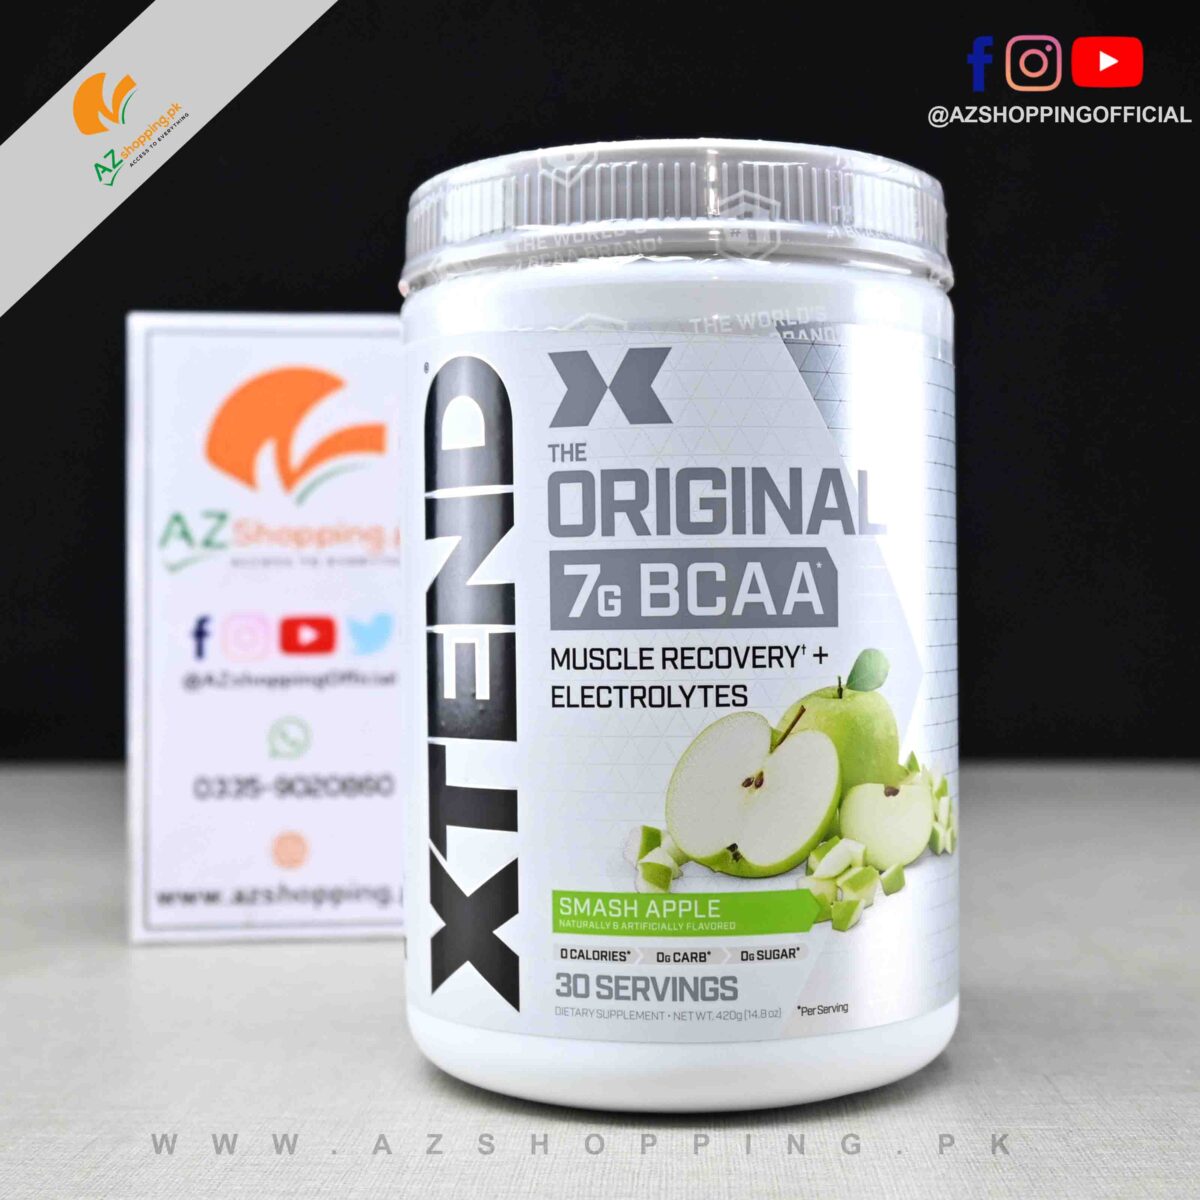 Xtend – The Original 7G BCAA Powder - Muscle Recovery + Electrolytes (Hydrate) with ZERO Calories/Carbs/Sugar - 30 Servings